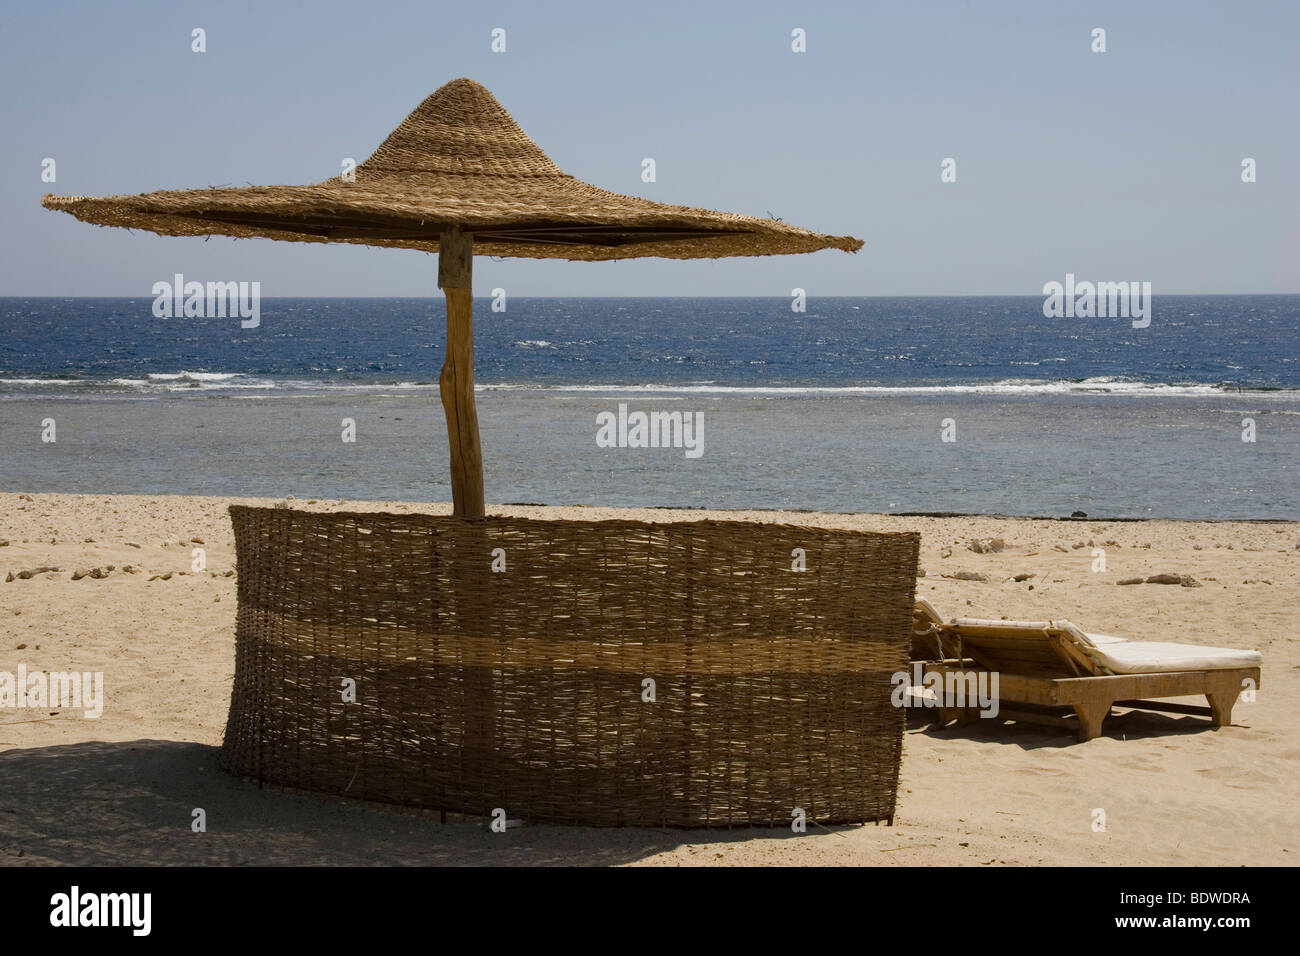 A parasol on the beach of the Red Sea at Marsa Alam, Egypt, Africa Stock Photo